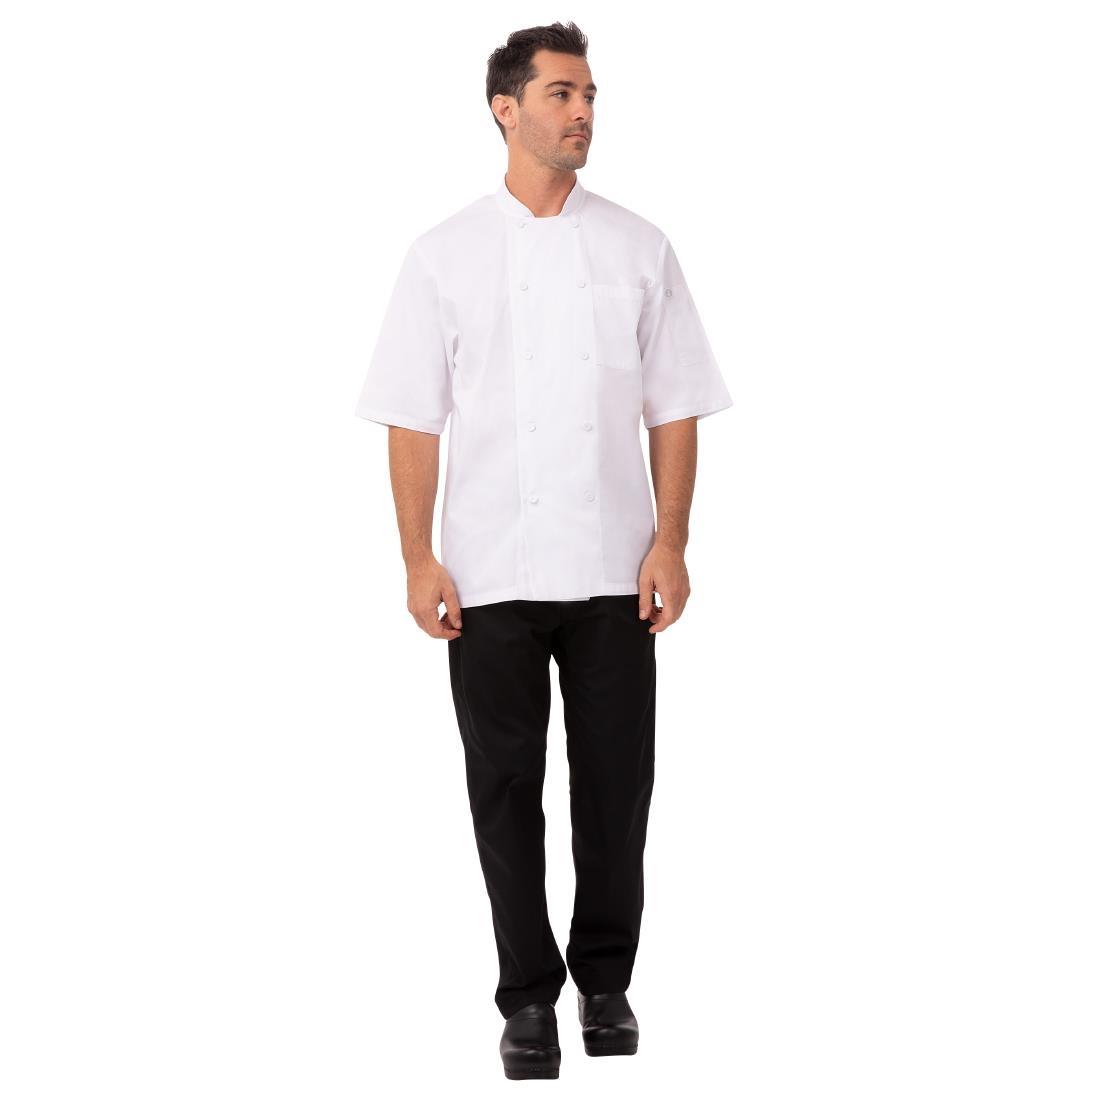 Chefs Works Montreal Cool Vent Unisex Short Sleeve Chefs Jacket White 4XL - A914-4XL  - 1